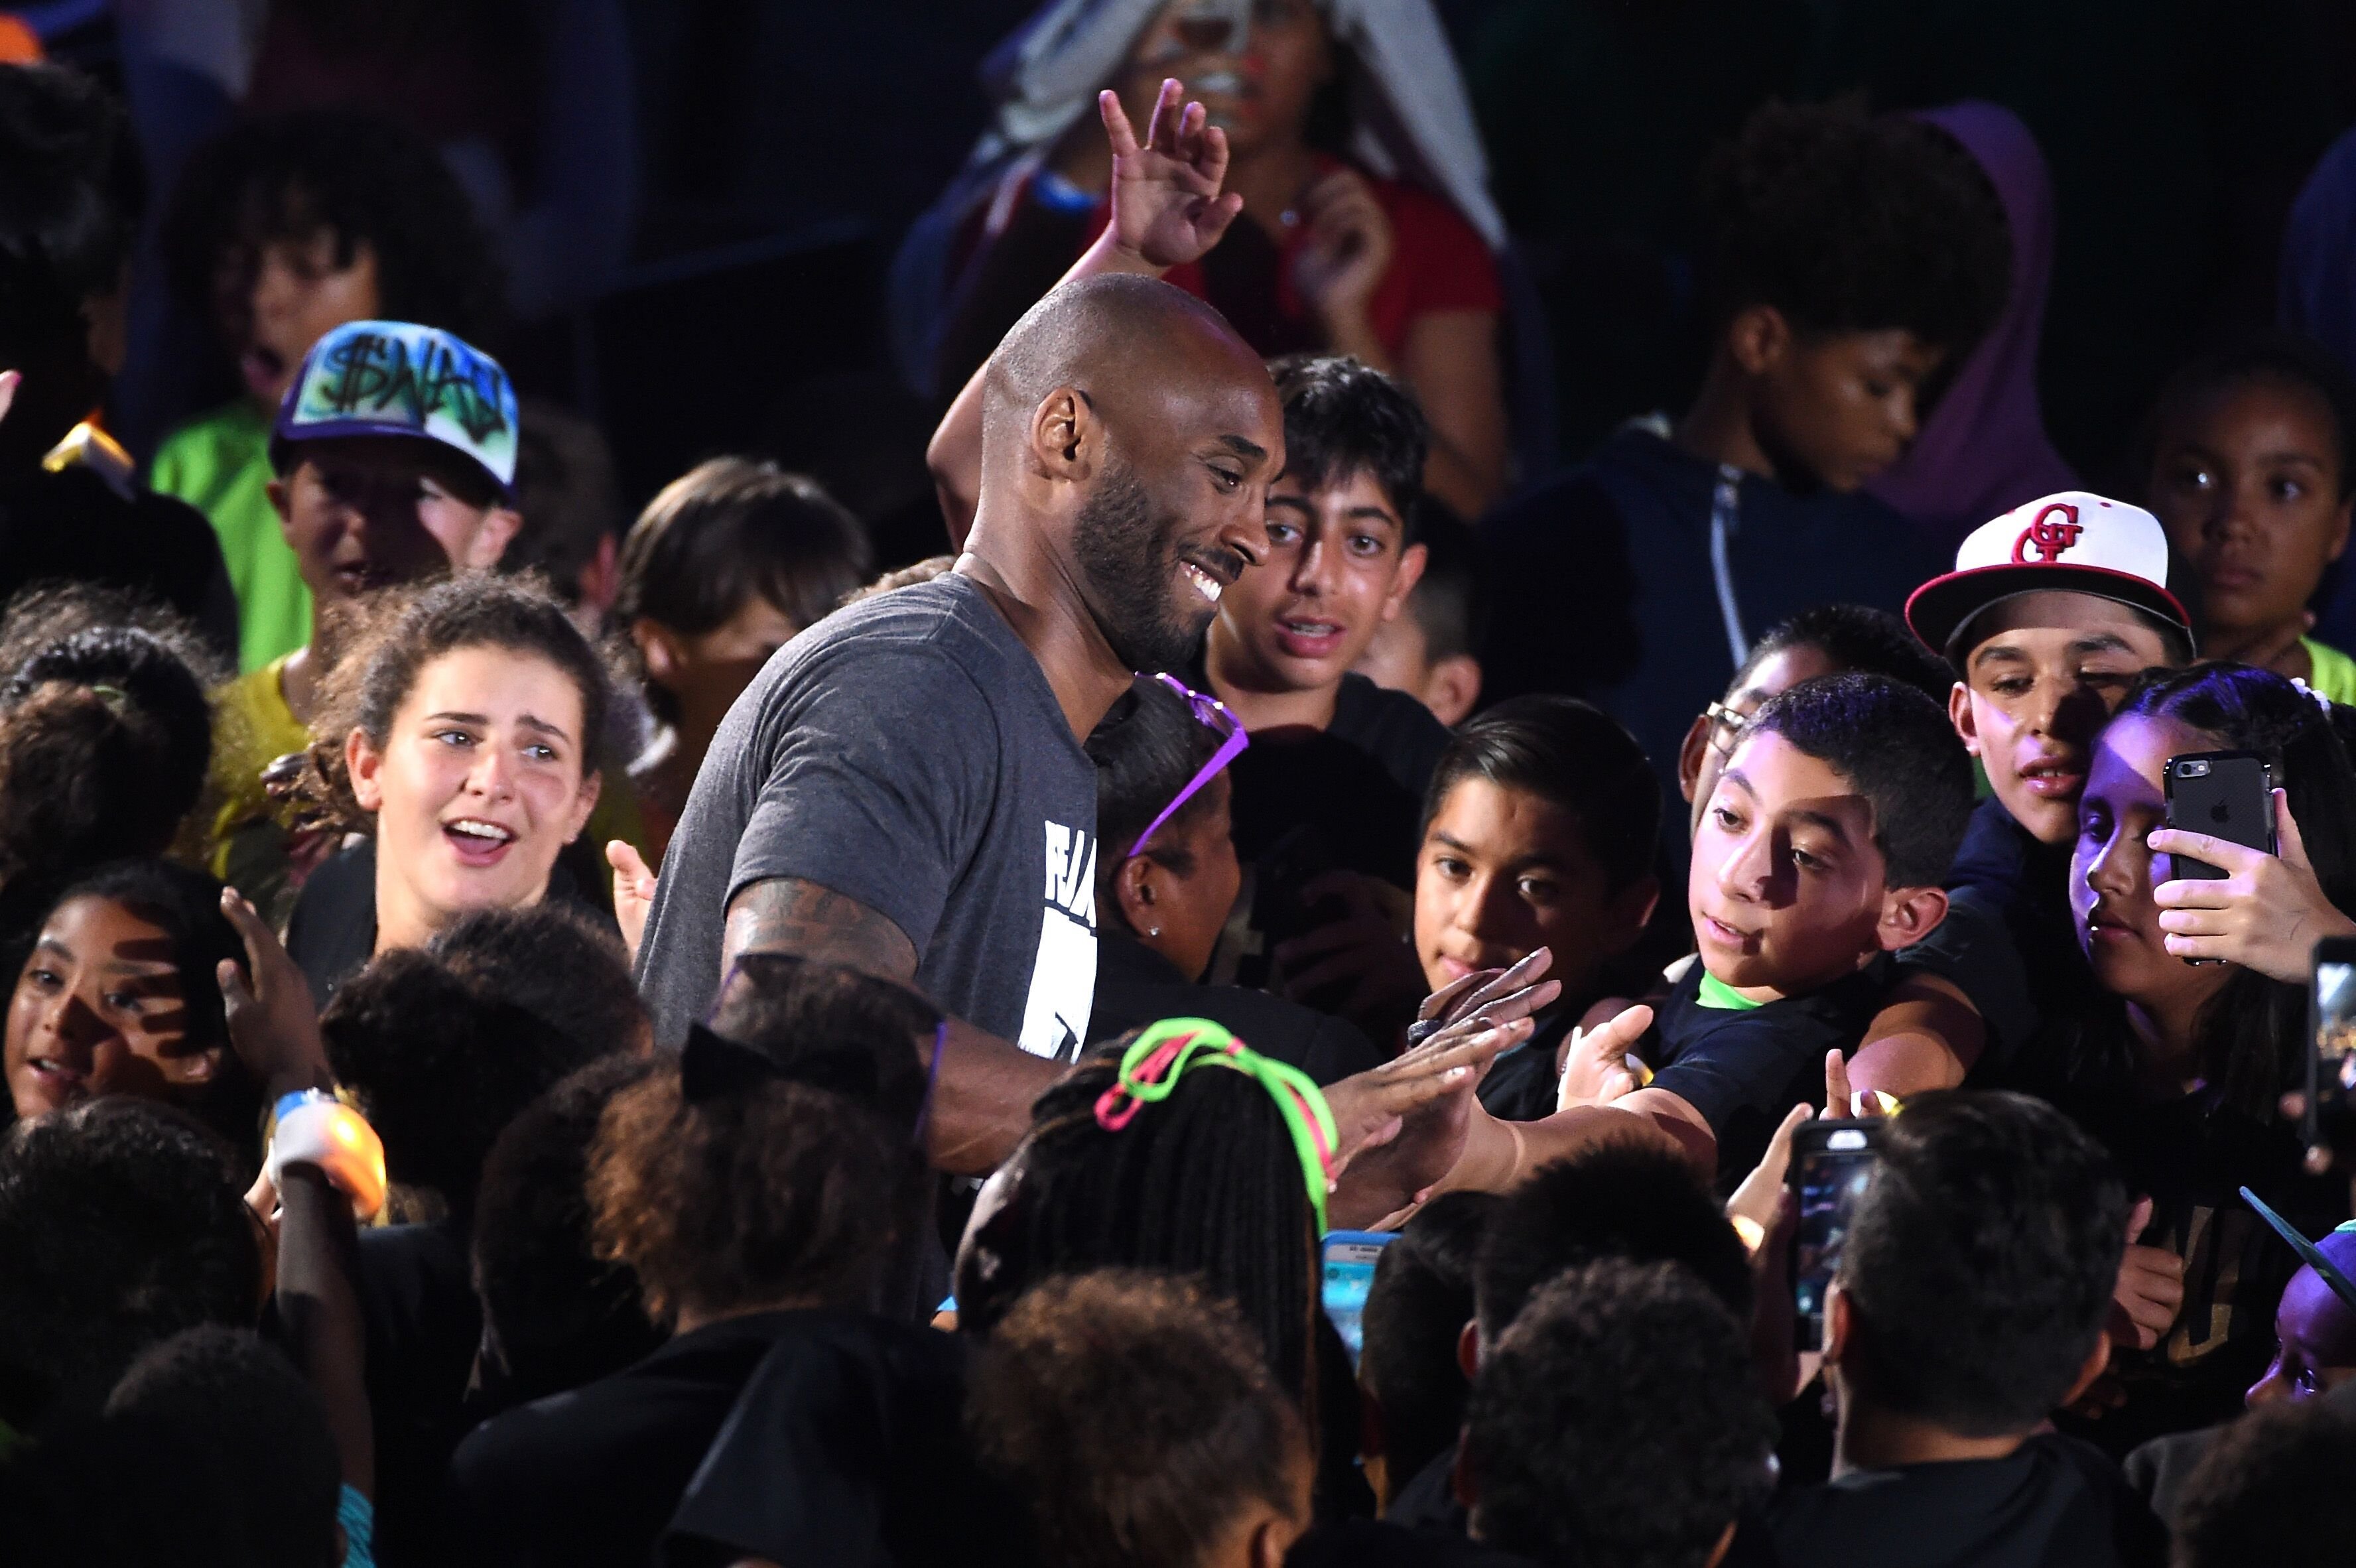 NBA icon Kobe Bryant at the Nickelodeon Kids Choice Sports Awards/ Source: Getty Images